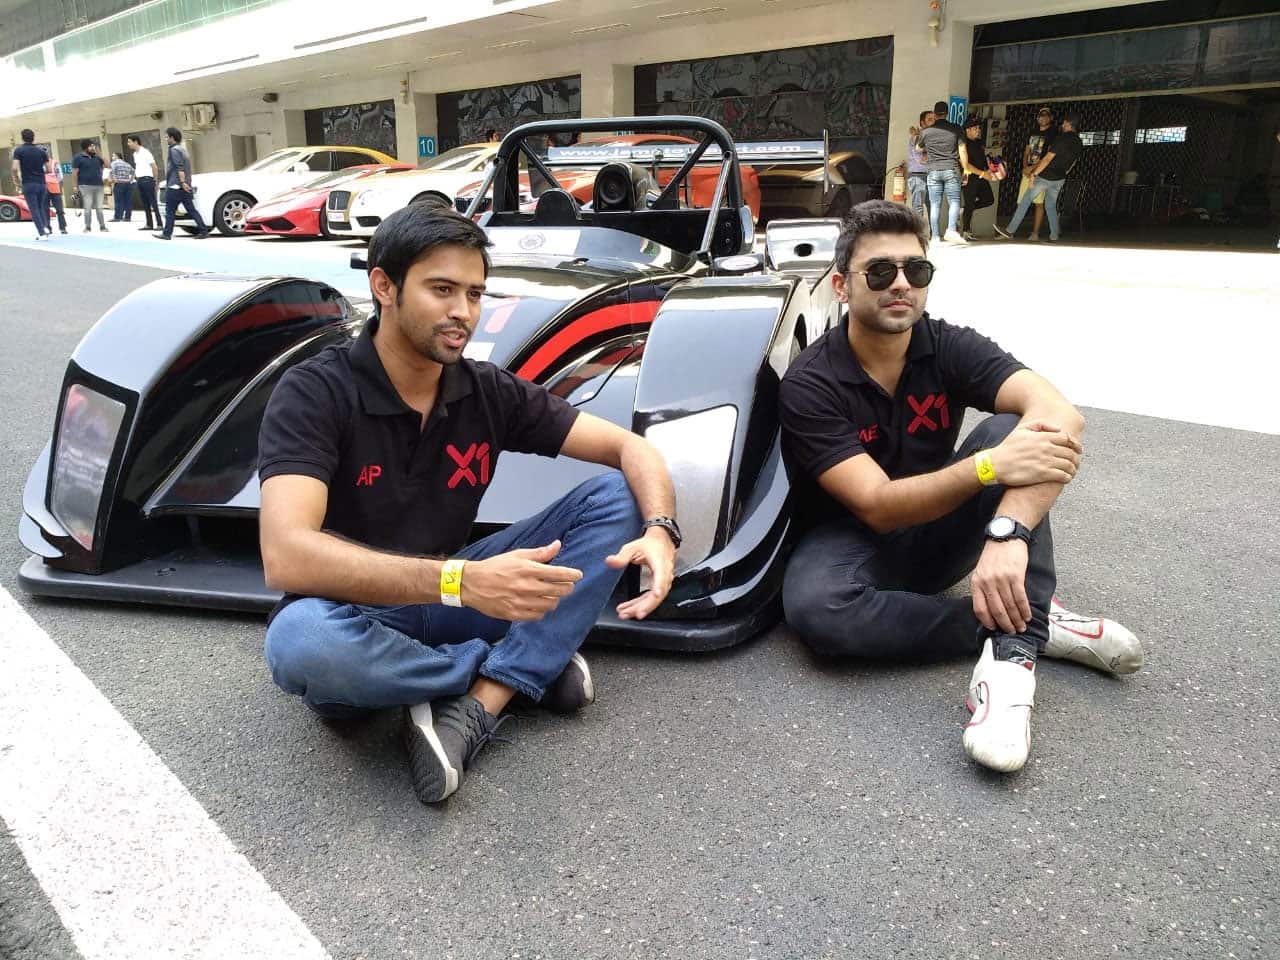 Racing Promotions Pvt Ltd was founded by Aditya Patel and Armaan Ebrahim to launch the Xtreme1 (X1) Racing League and promote motorsports in India.